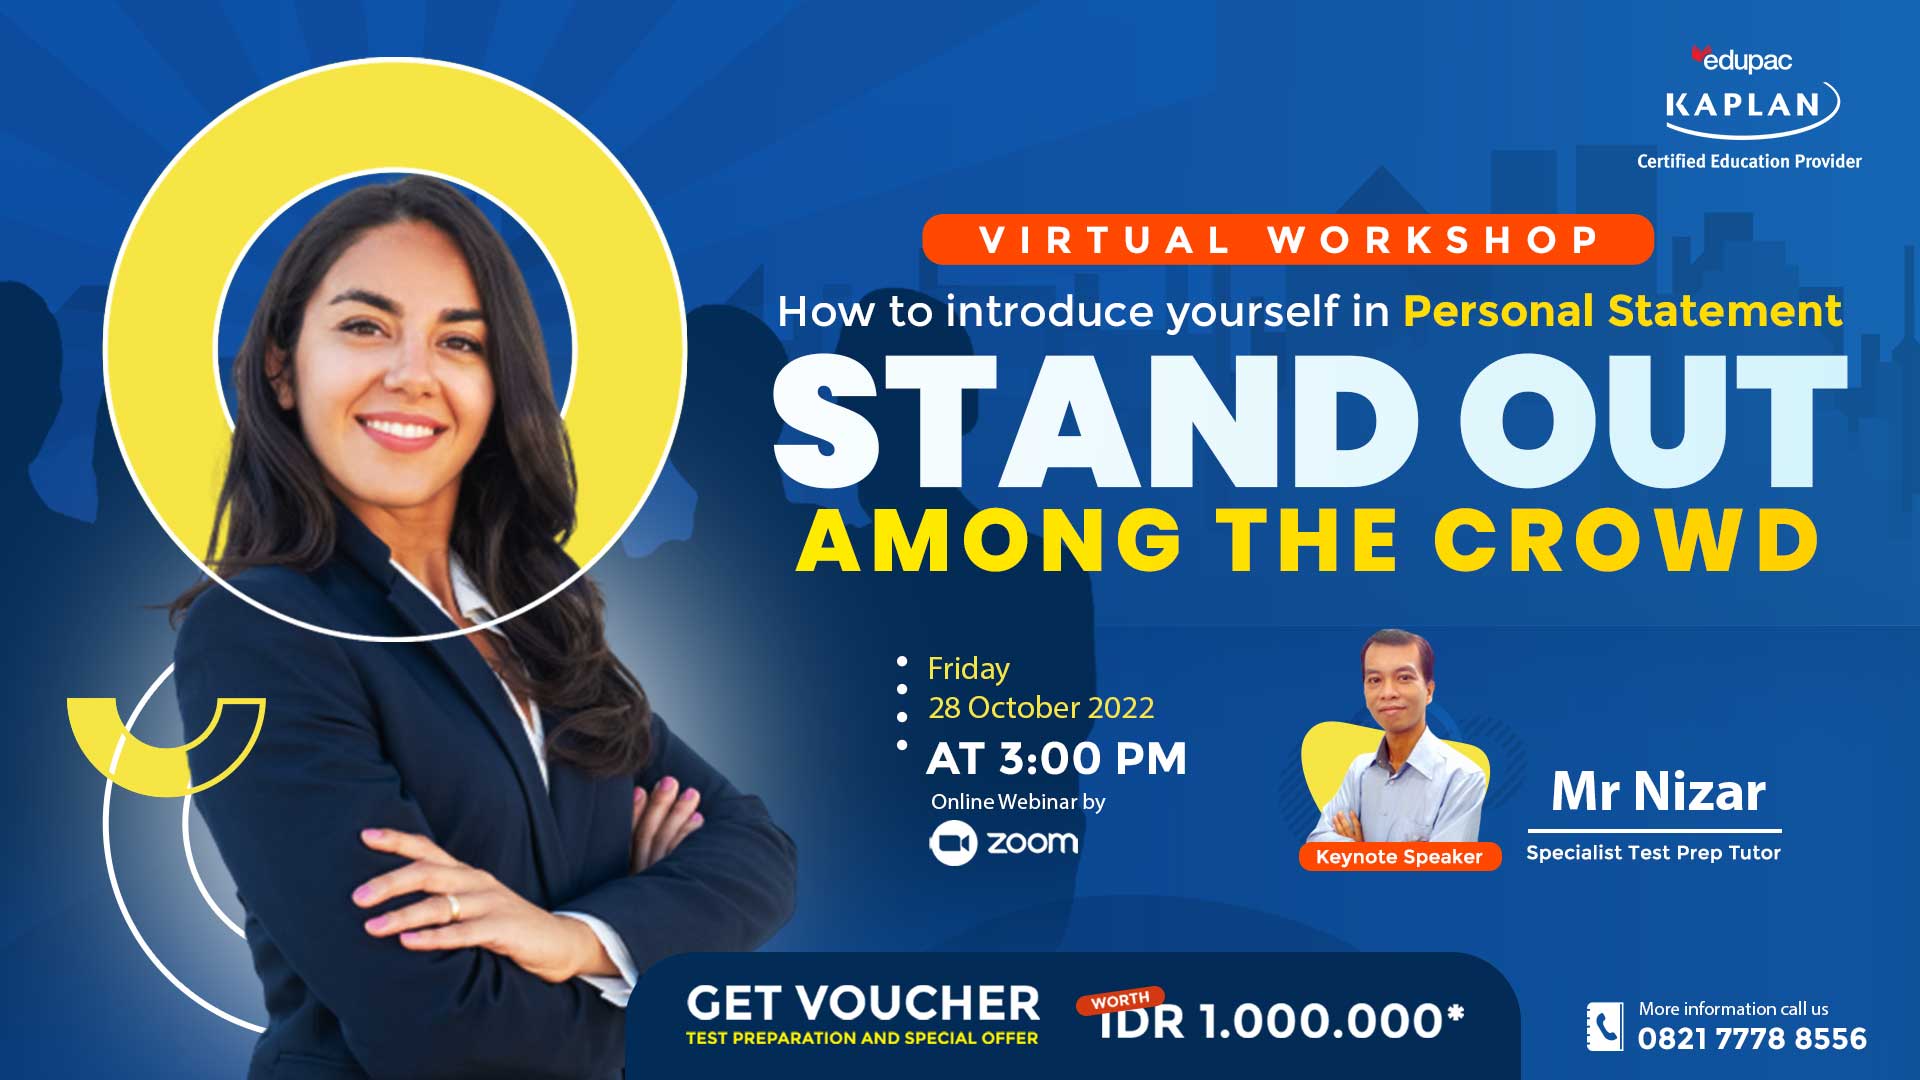 FREE Virtual Workshop How to Introduce Yourself in Personal Statement "Stand Out Among The Crowd"